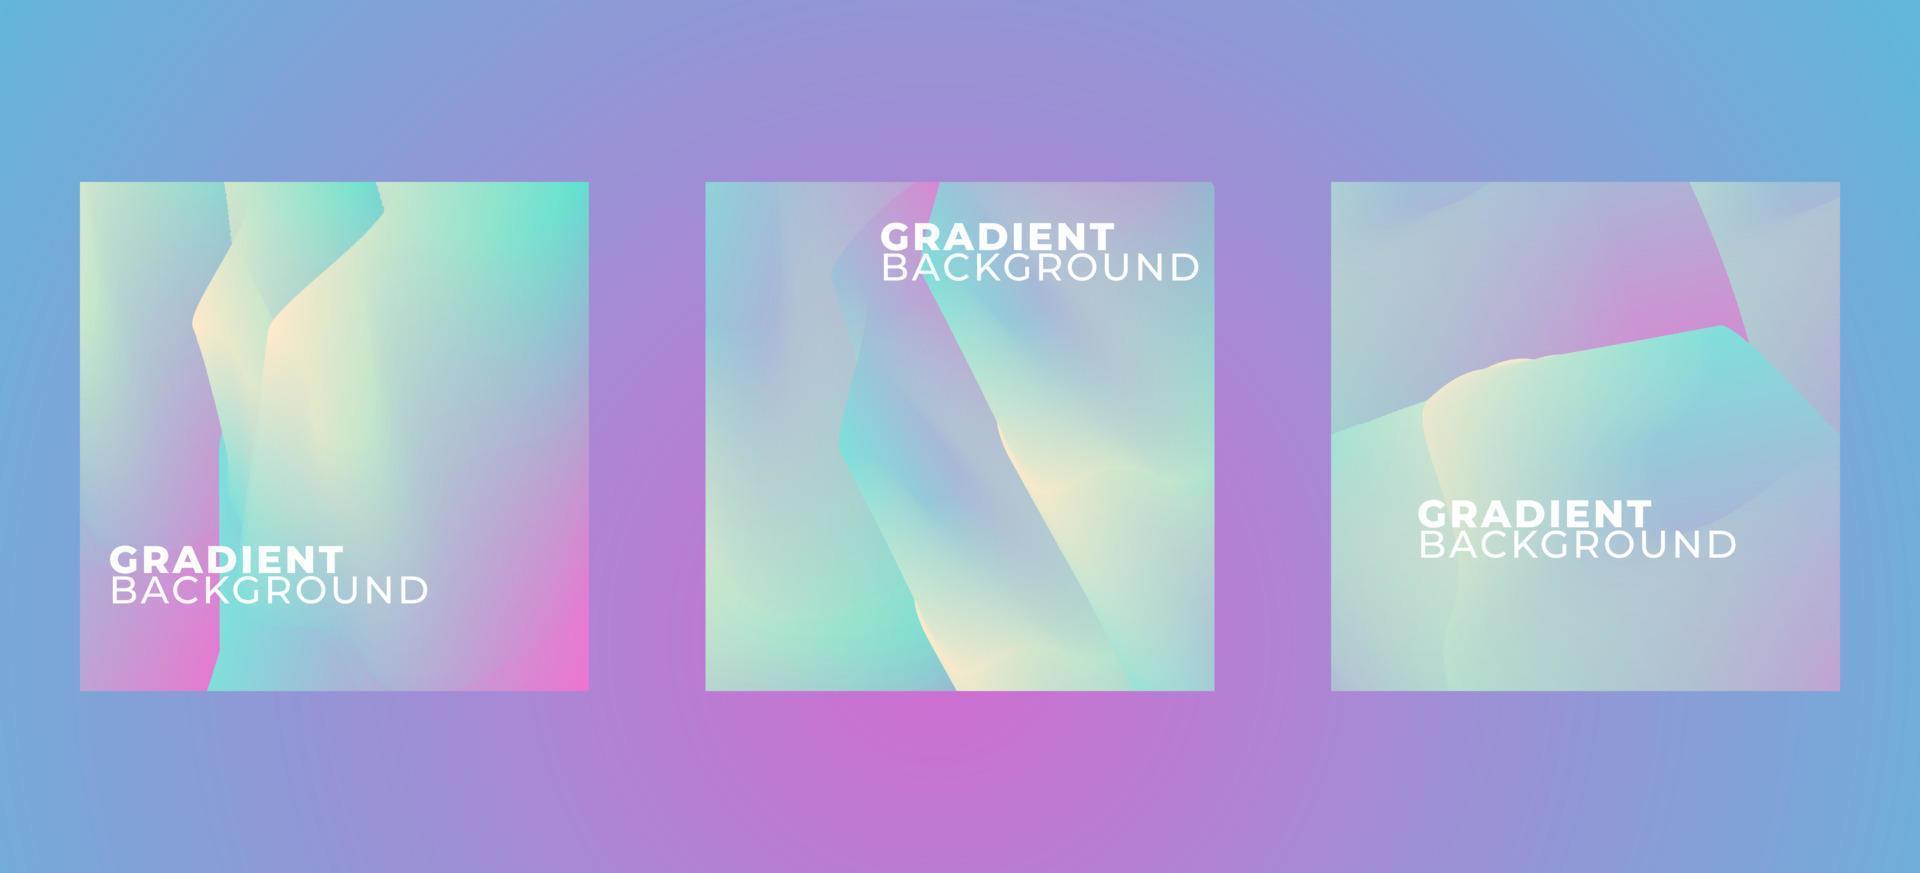 Abstract gradient background for poster free vector